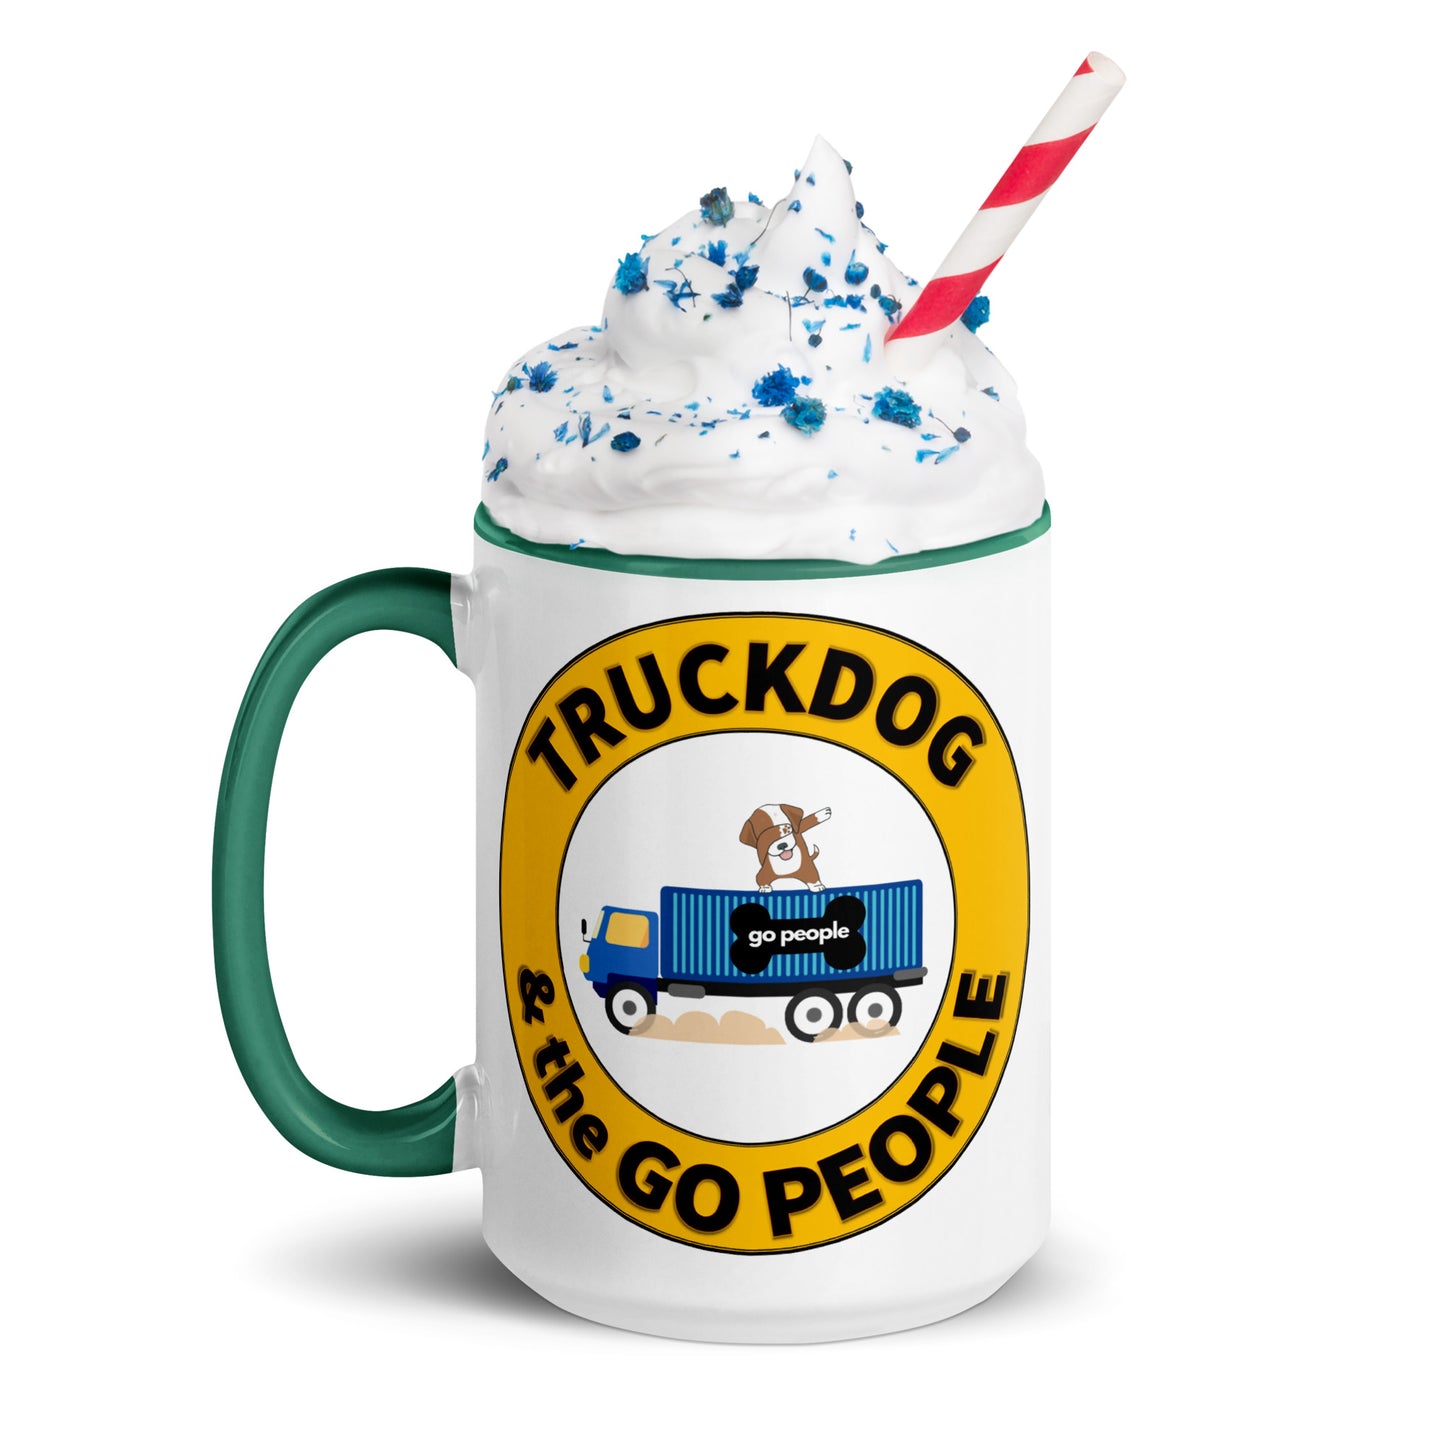 TruckDog & The Go People Classic Dab Mug With Color Inside